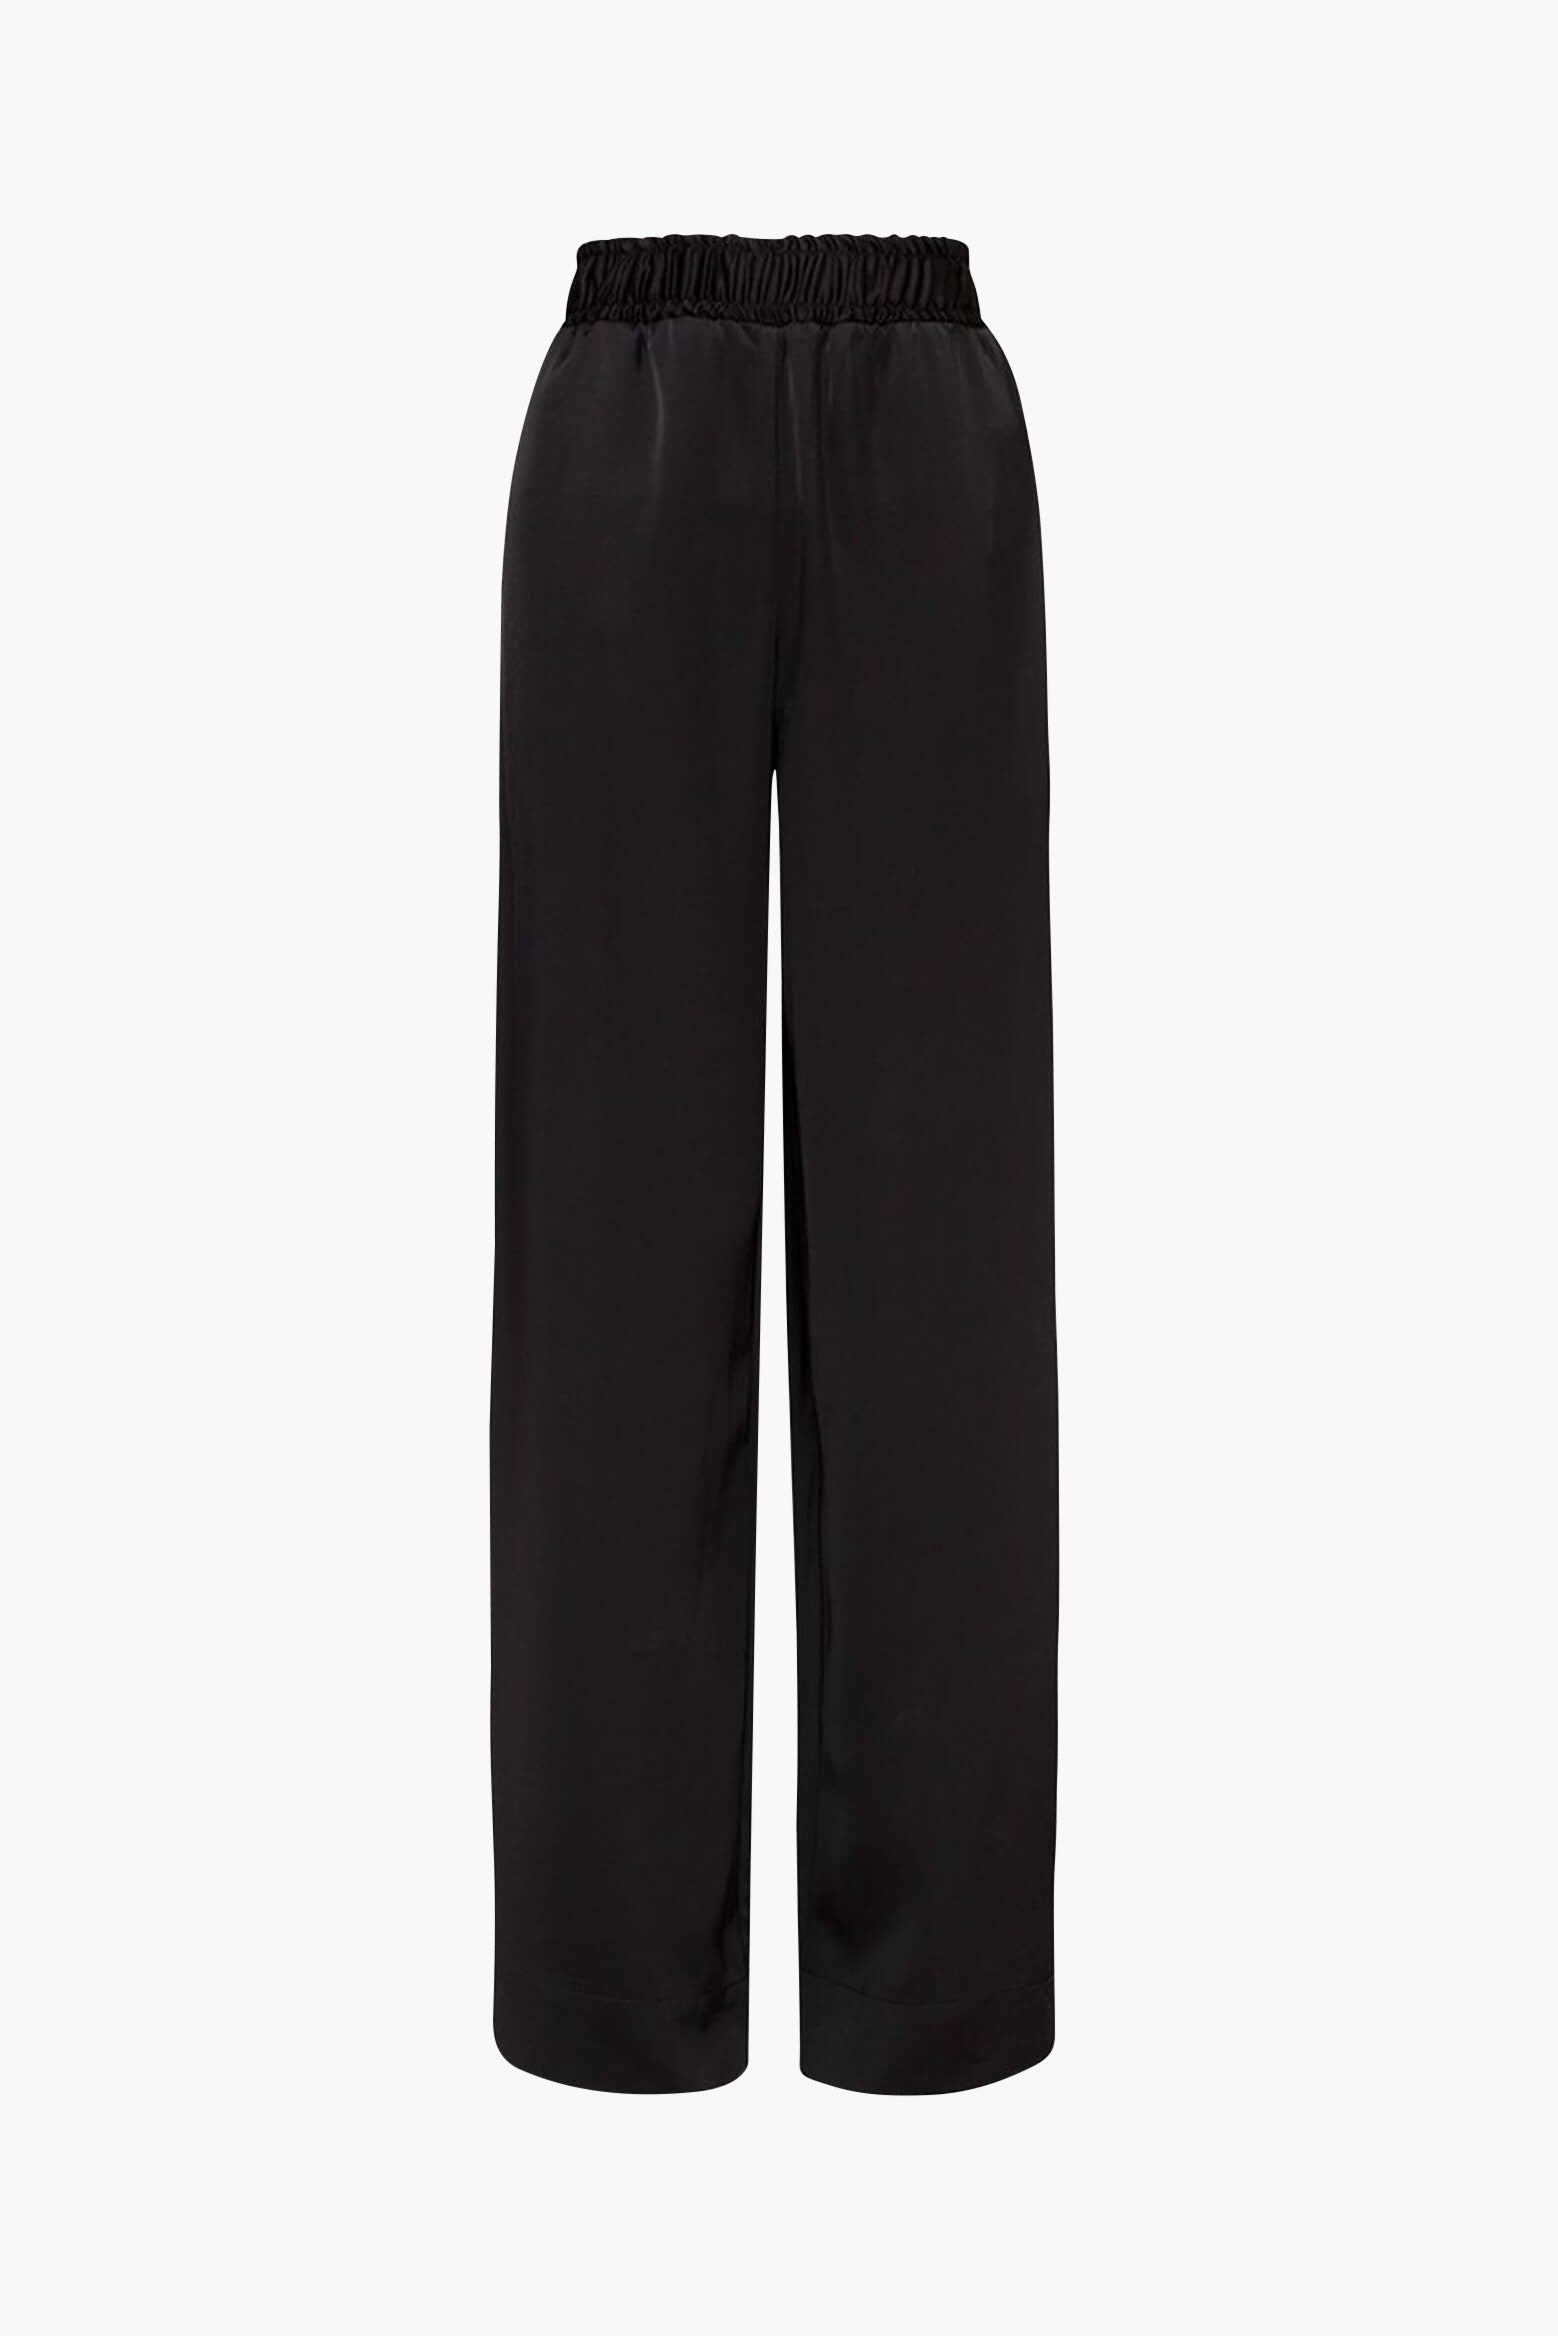 Esse Studios Gathered Black Pants from The New Trend